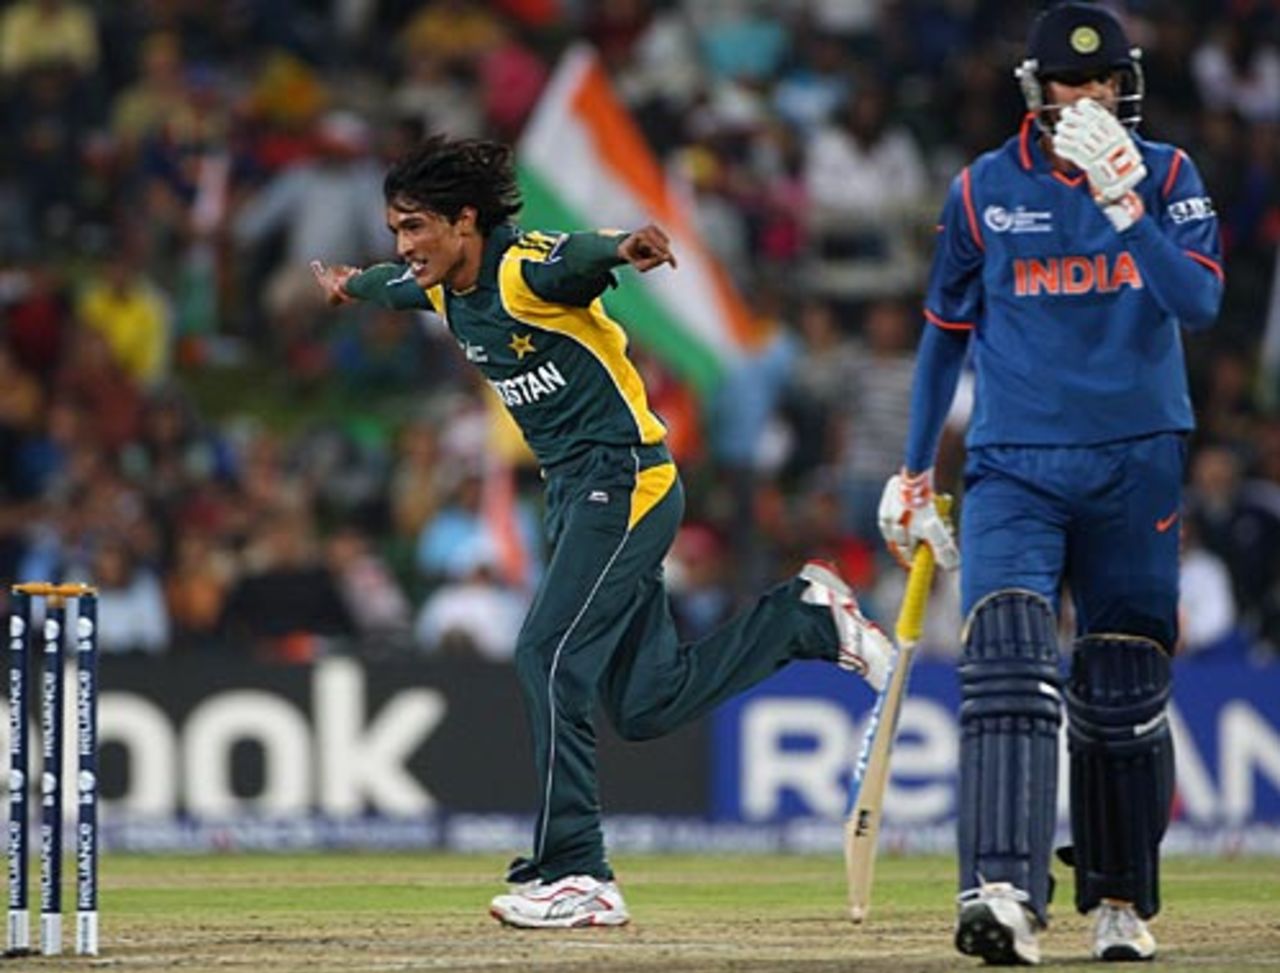 Mohammad Aamer dismissed Yusuf Pathan, India v Pakistan, Champions Trophy, Group A, Centurion, September 26, 2009